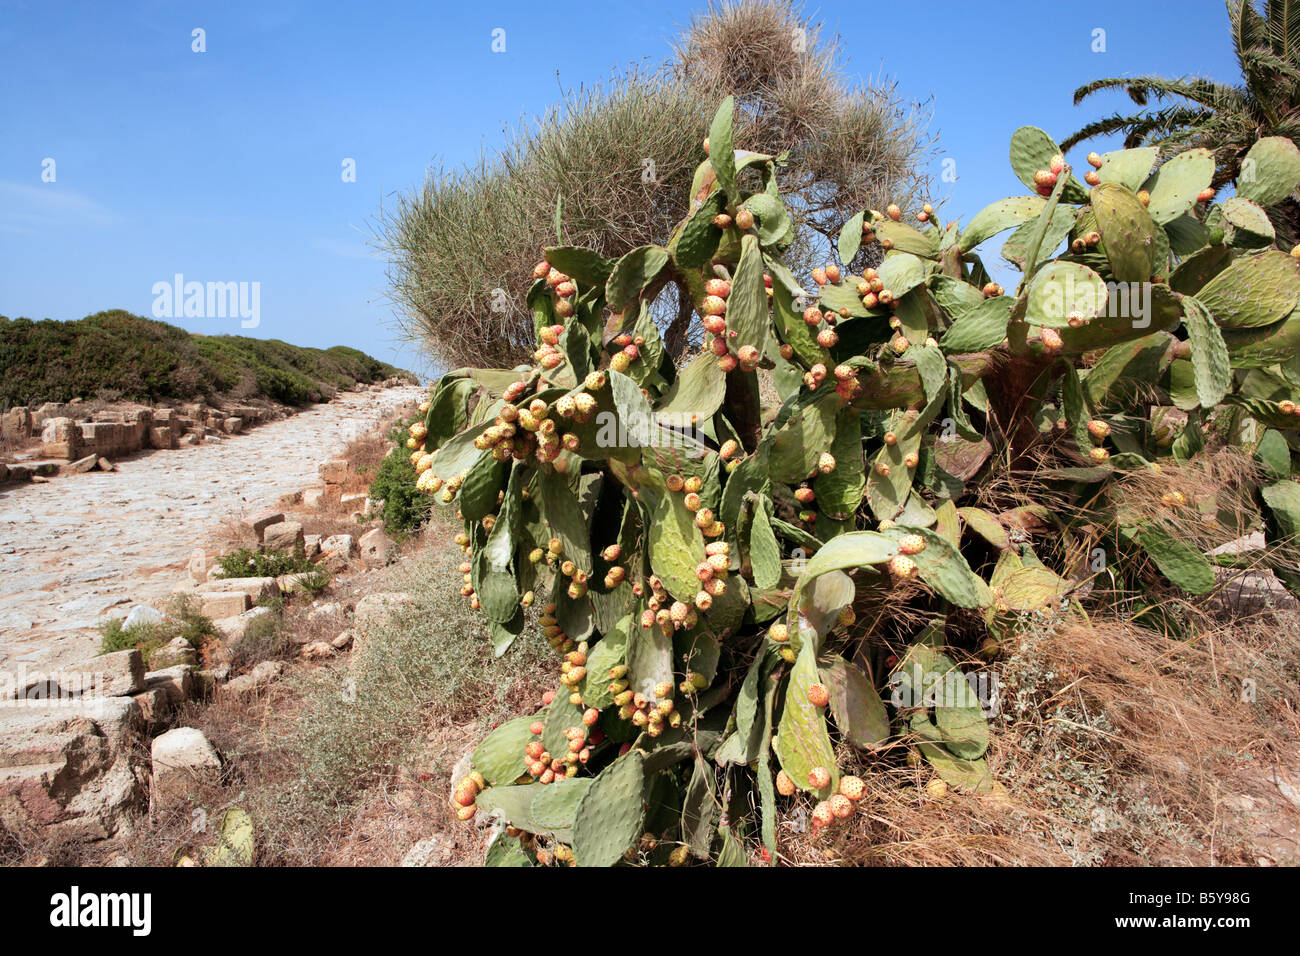 Prickly Pears at Selinunte, Sicily Stock Photo